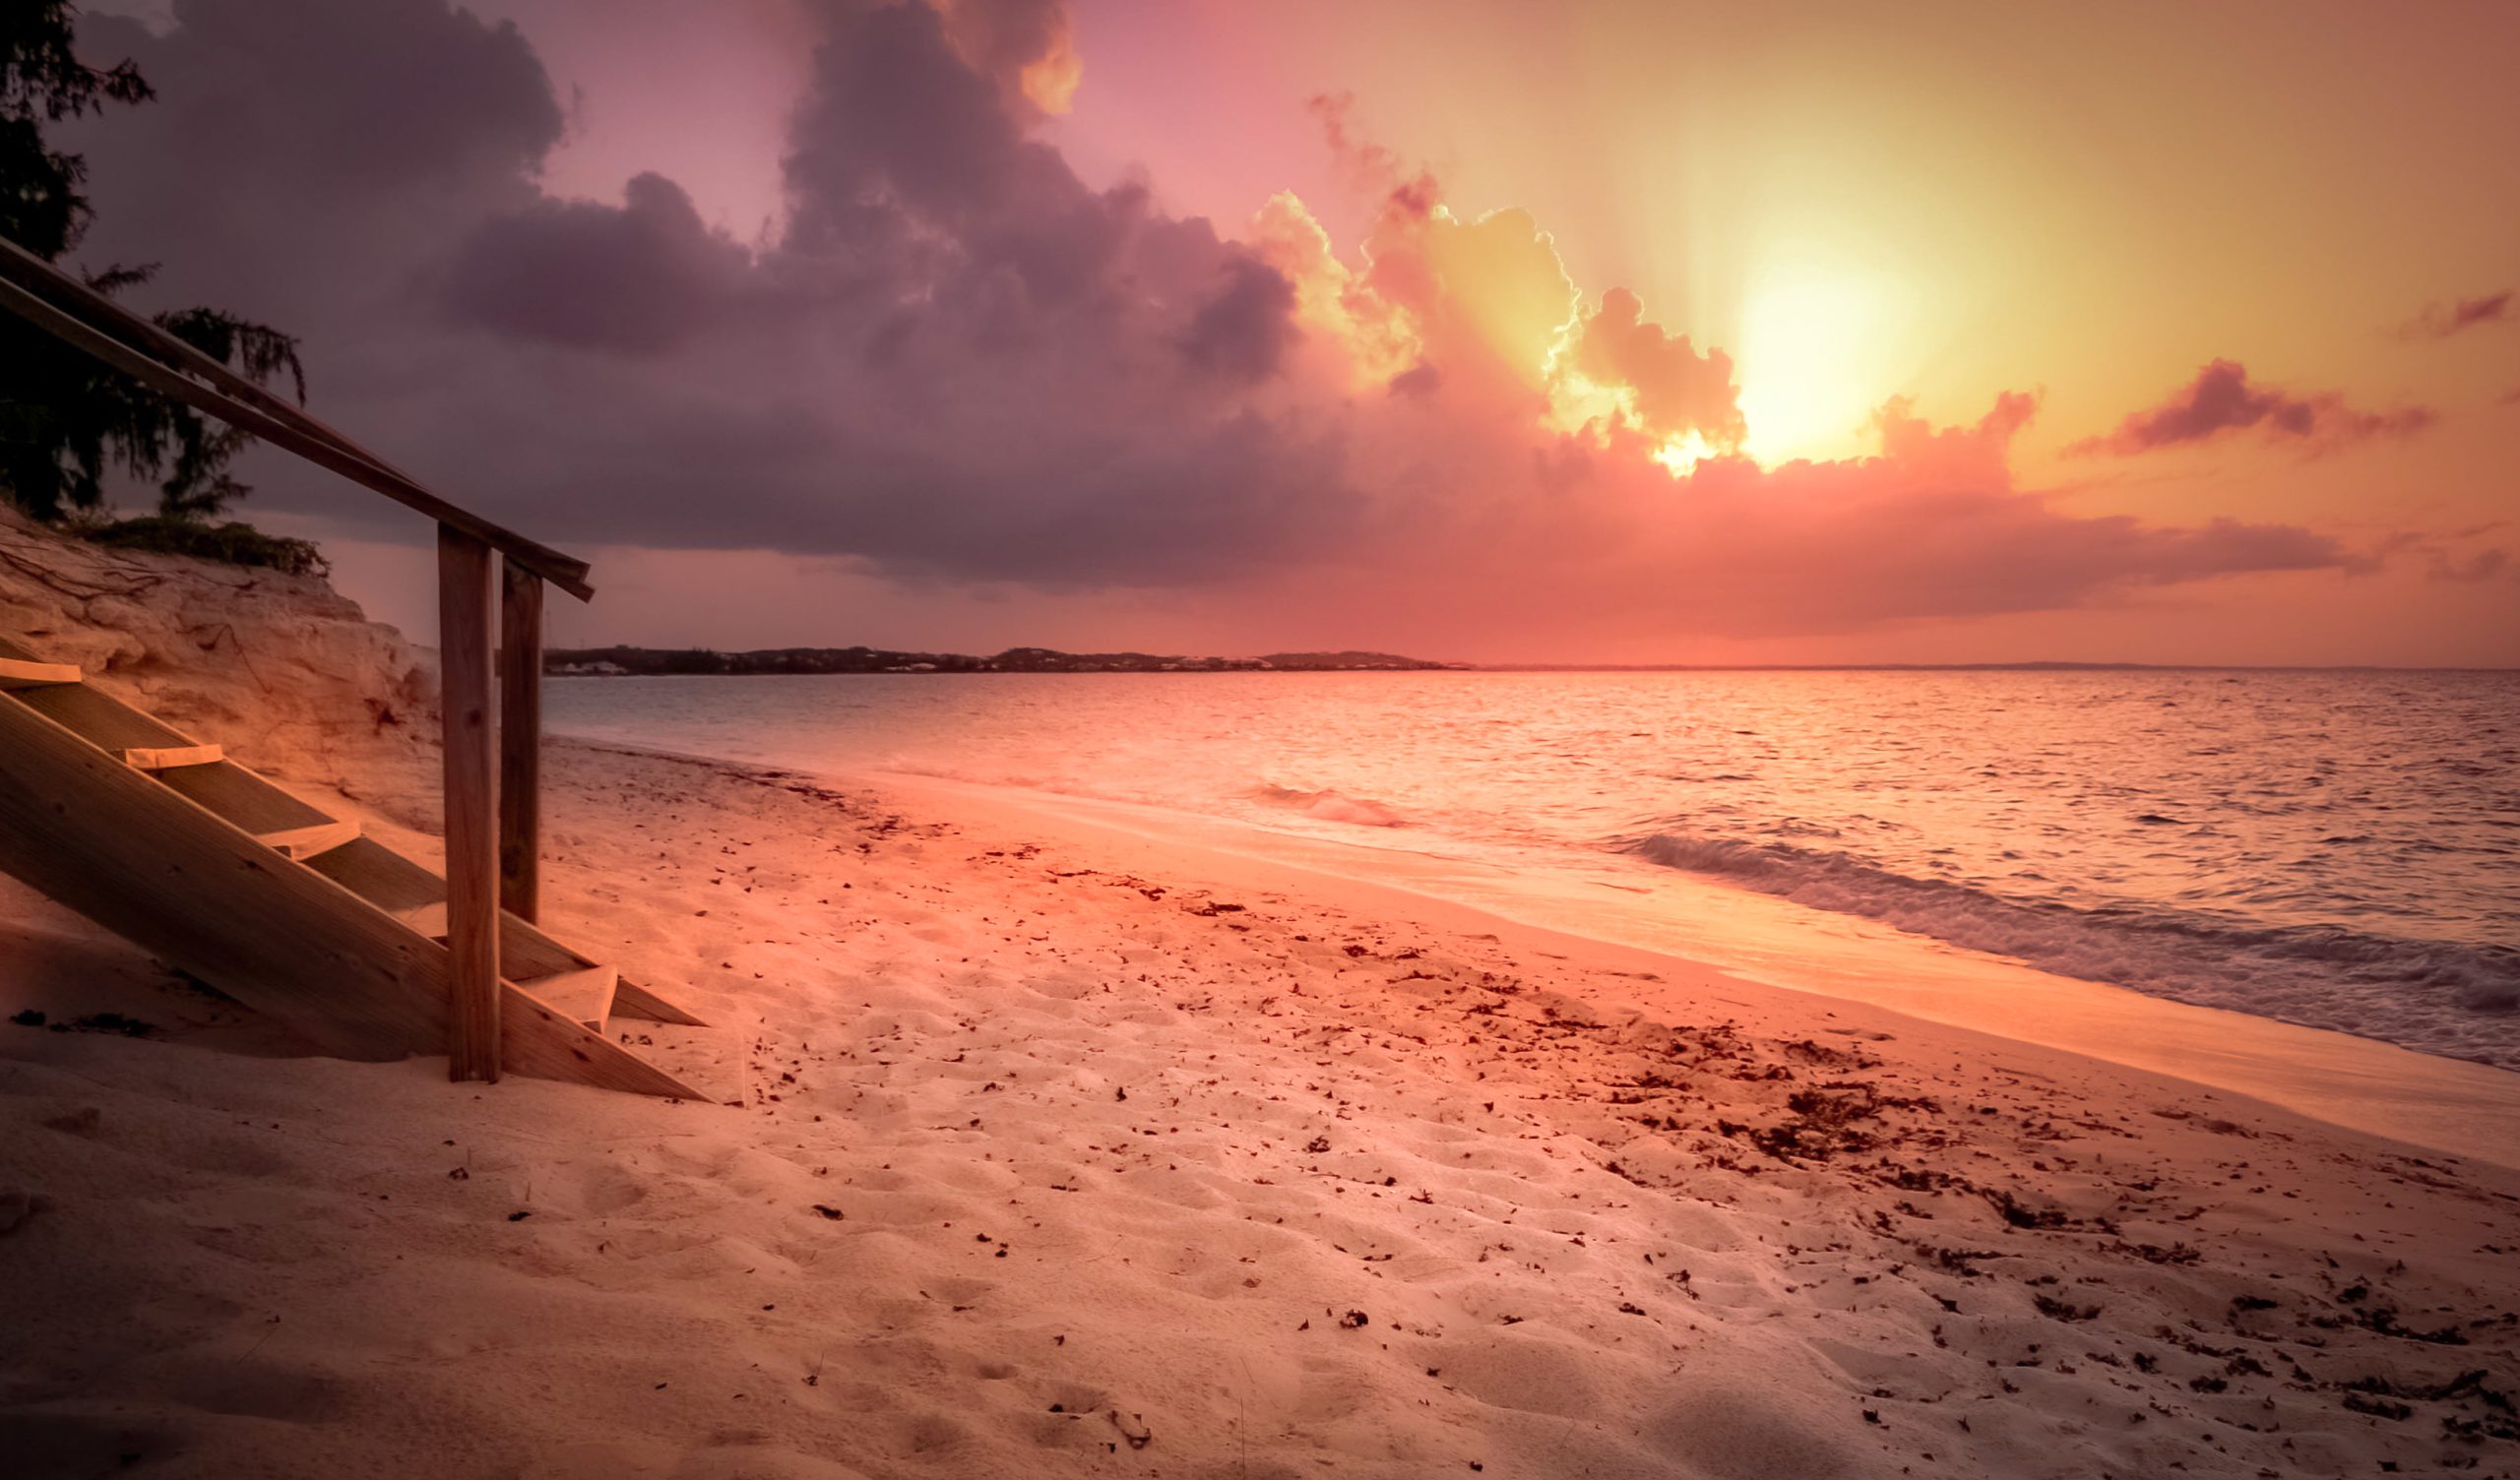 Sunset in Grace Bay, Turks and Caicos Islands. Source: Jason Boldero, Flickr